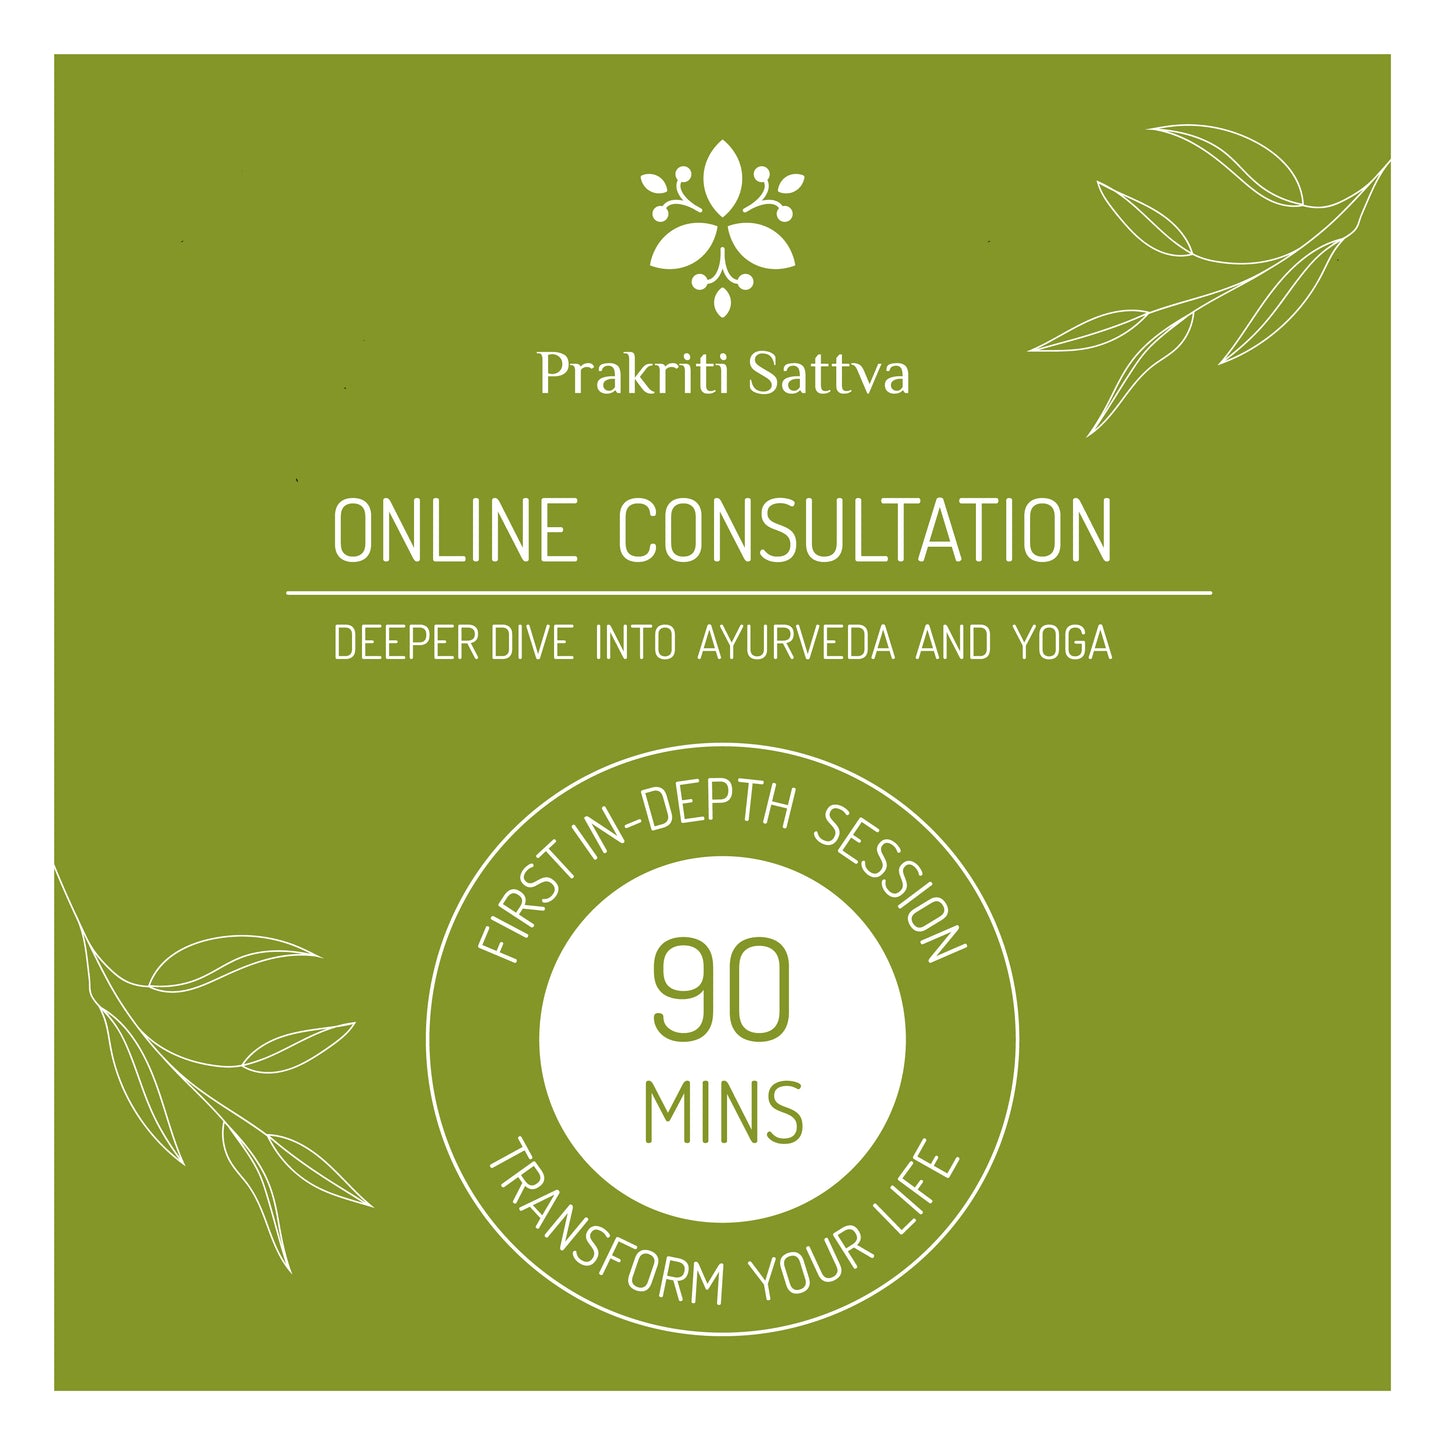 Follow up Ayurveda and Yoga Consultation - 90 minutes - Online